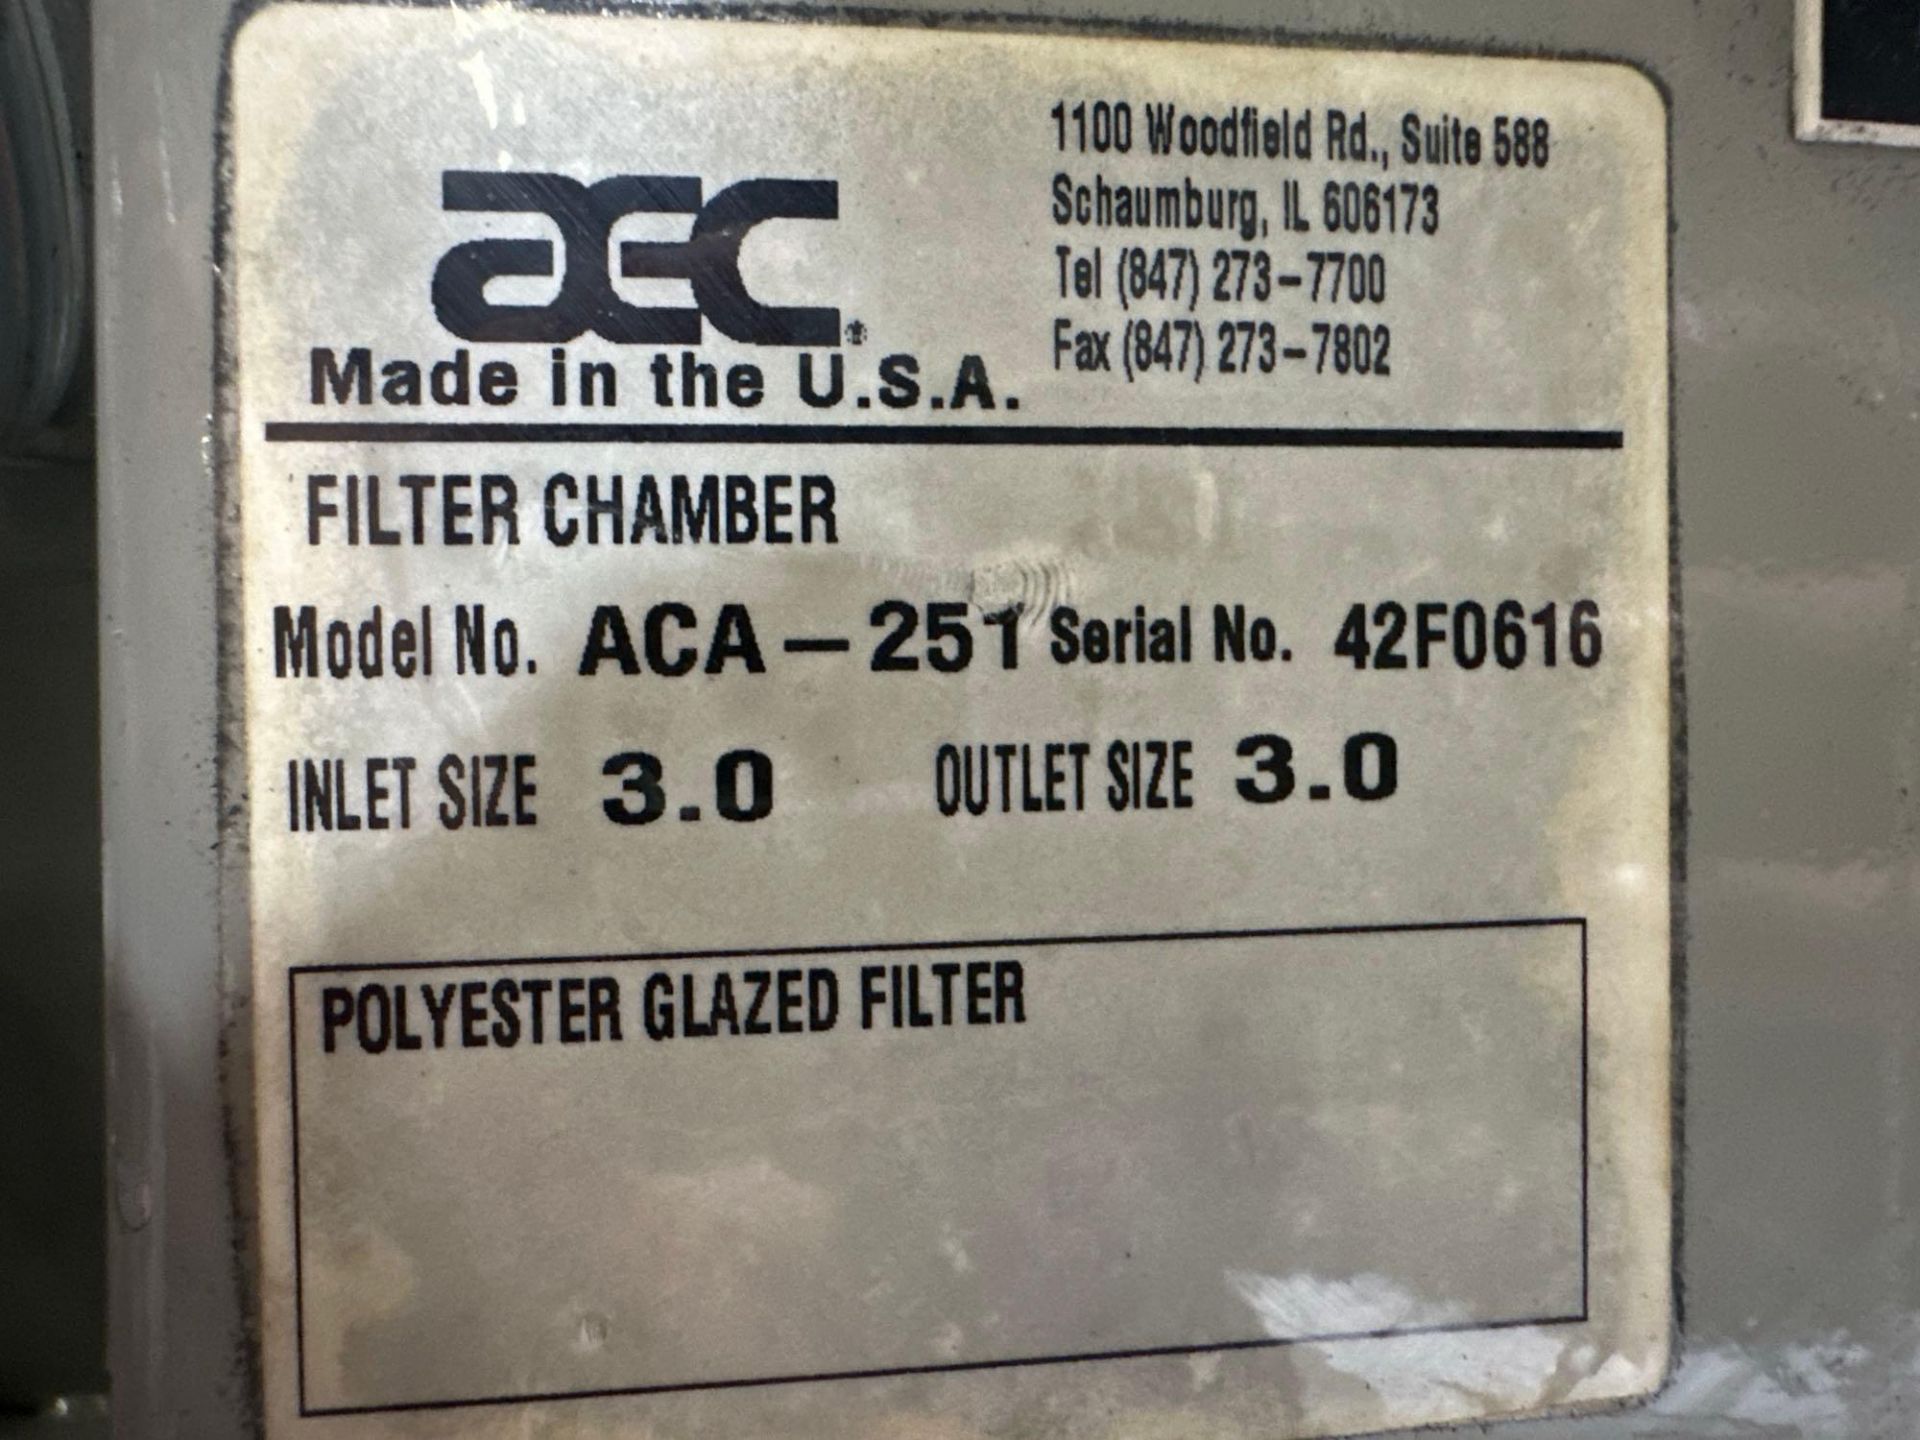 AEC ACA-25T Filter Chamber, s/n 42f0616 - Image 6 of 6